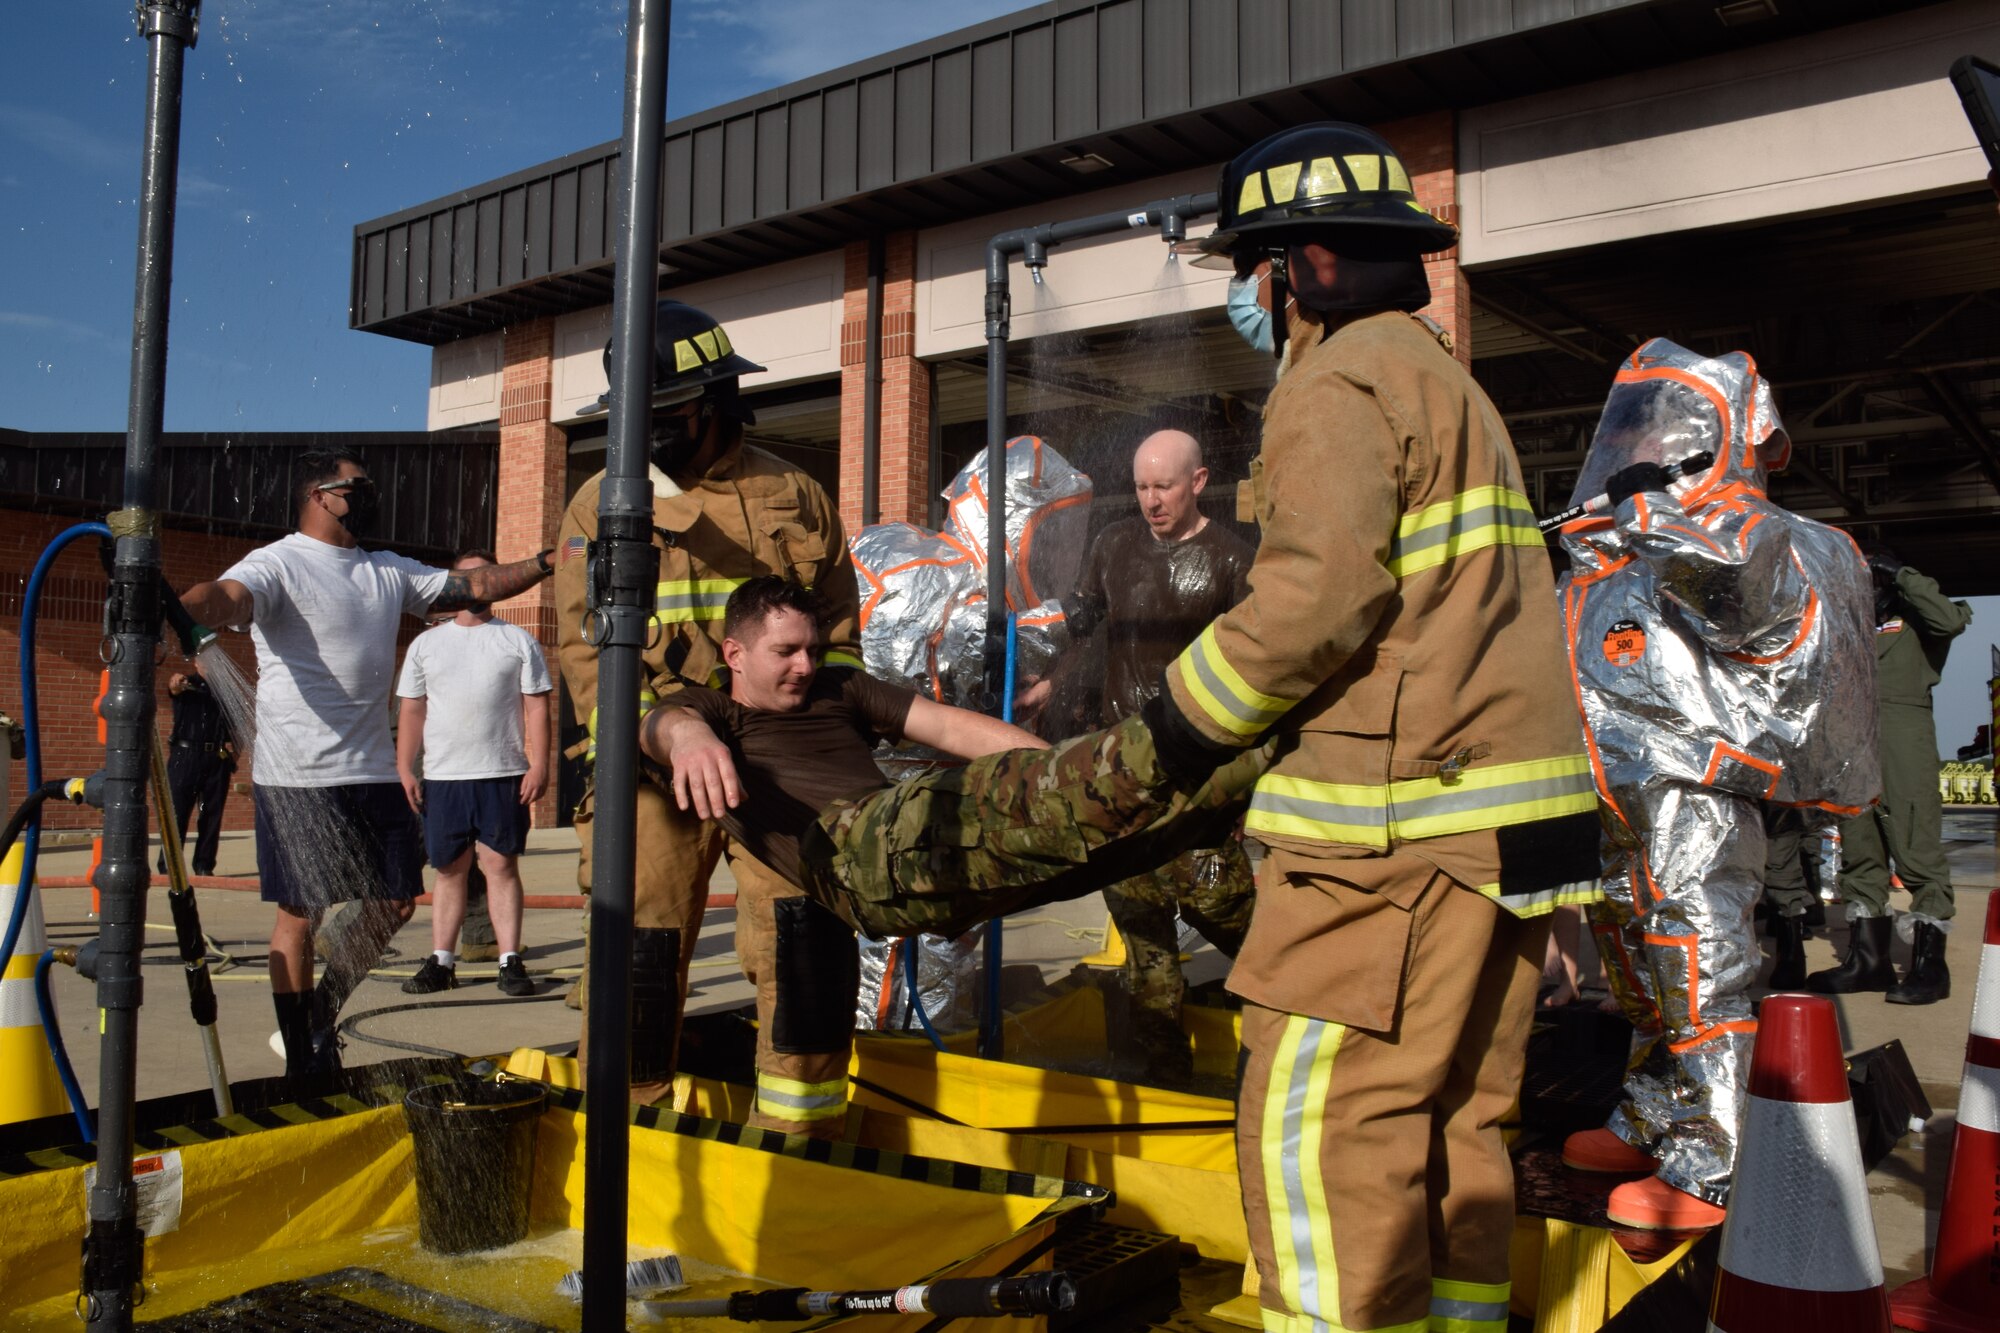 The 433rd Civil Engineer Squadron and Joint Base San Antonio Fire Department firefighters move a simulated contaminated patient during a joint training exercise at JBSA-Lackland, Texas, April 8, 2021. The firefighters trained to provide the appropriate care. (U.S. Air Force photo by Senior Airman Brittany Wich)